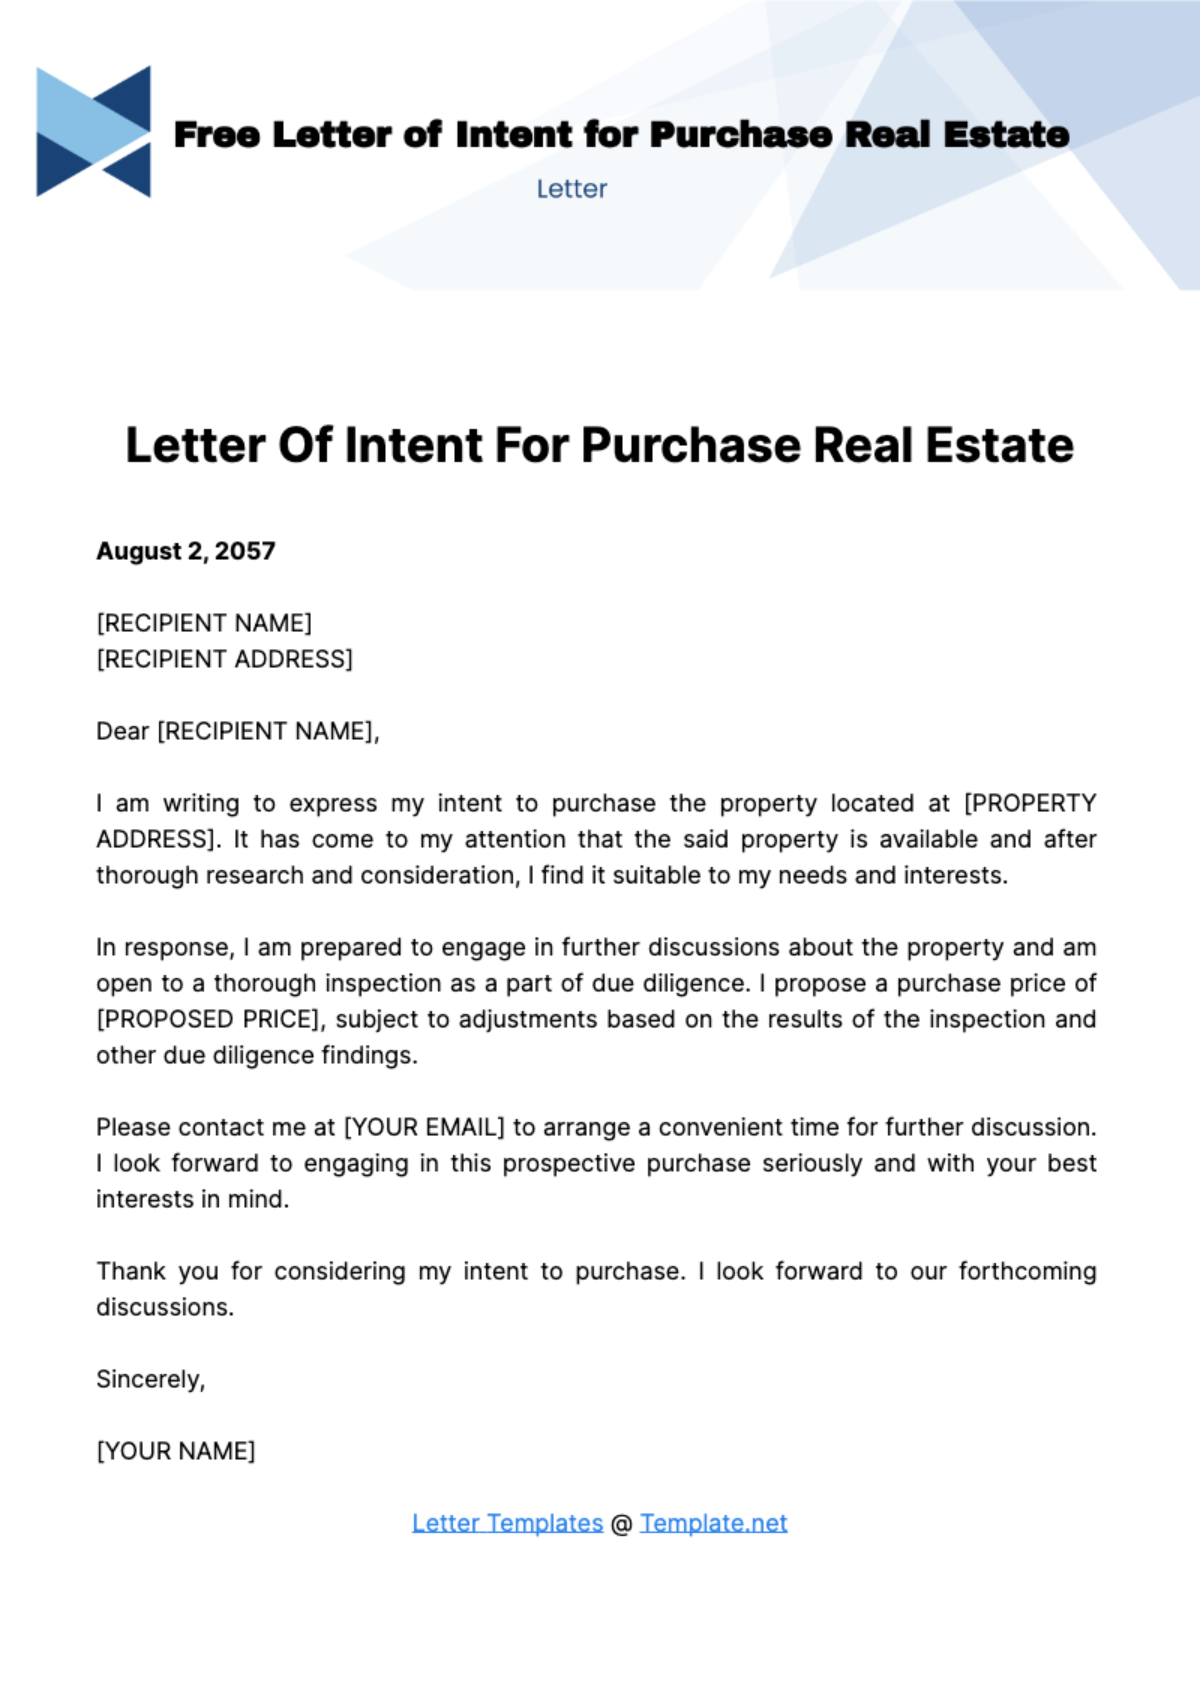 Letter of Intent for Purchase Real Estate Template